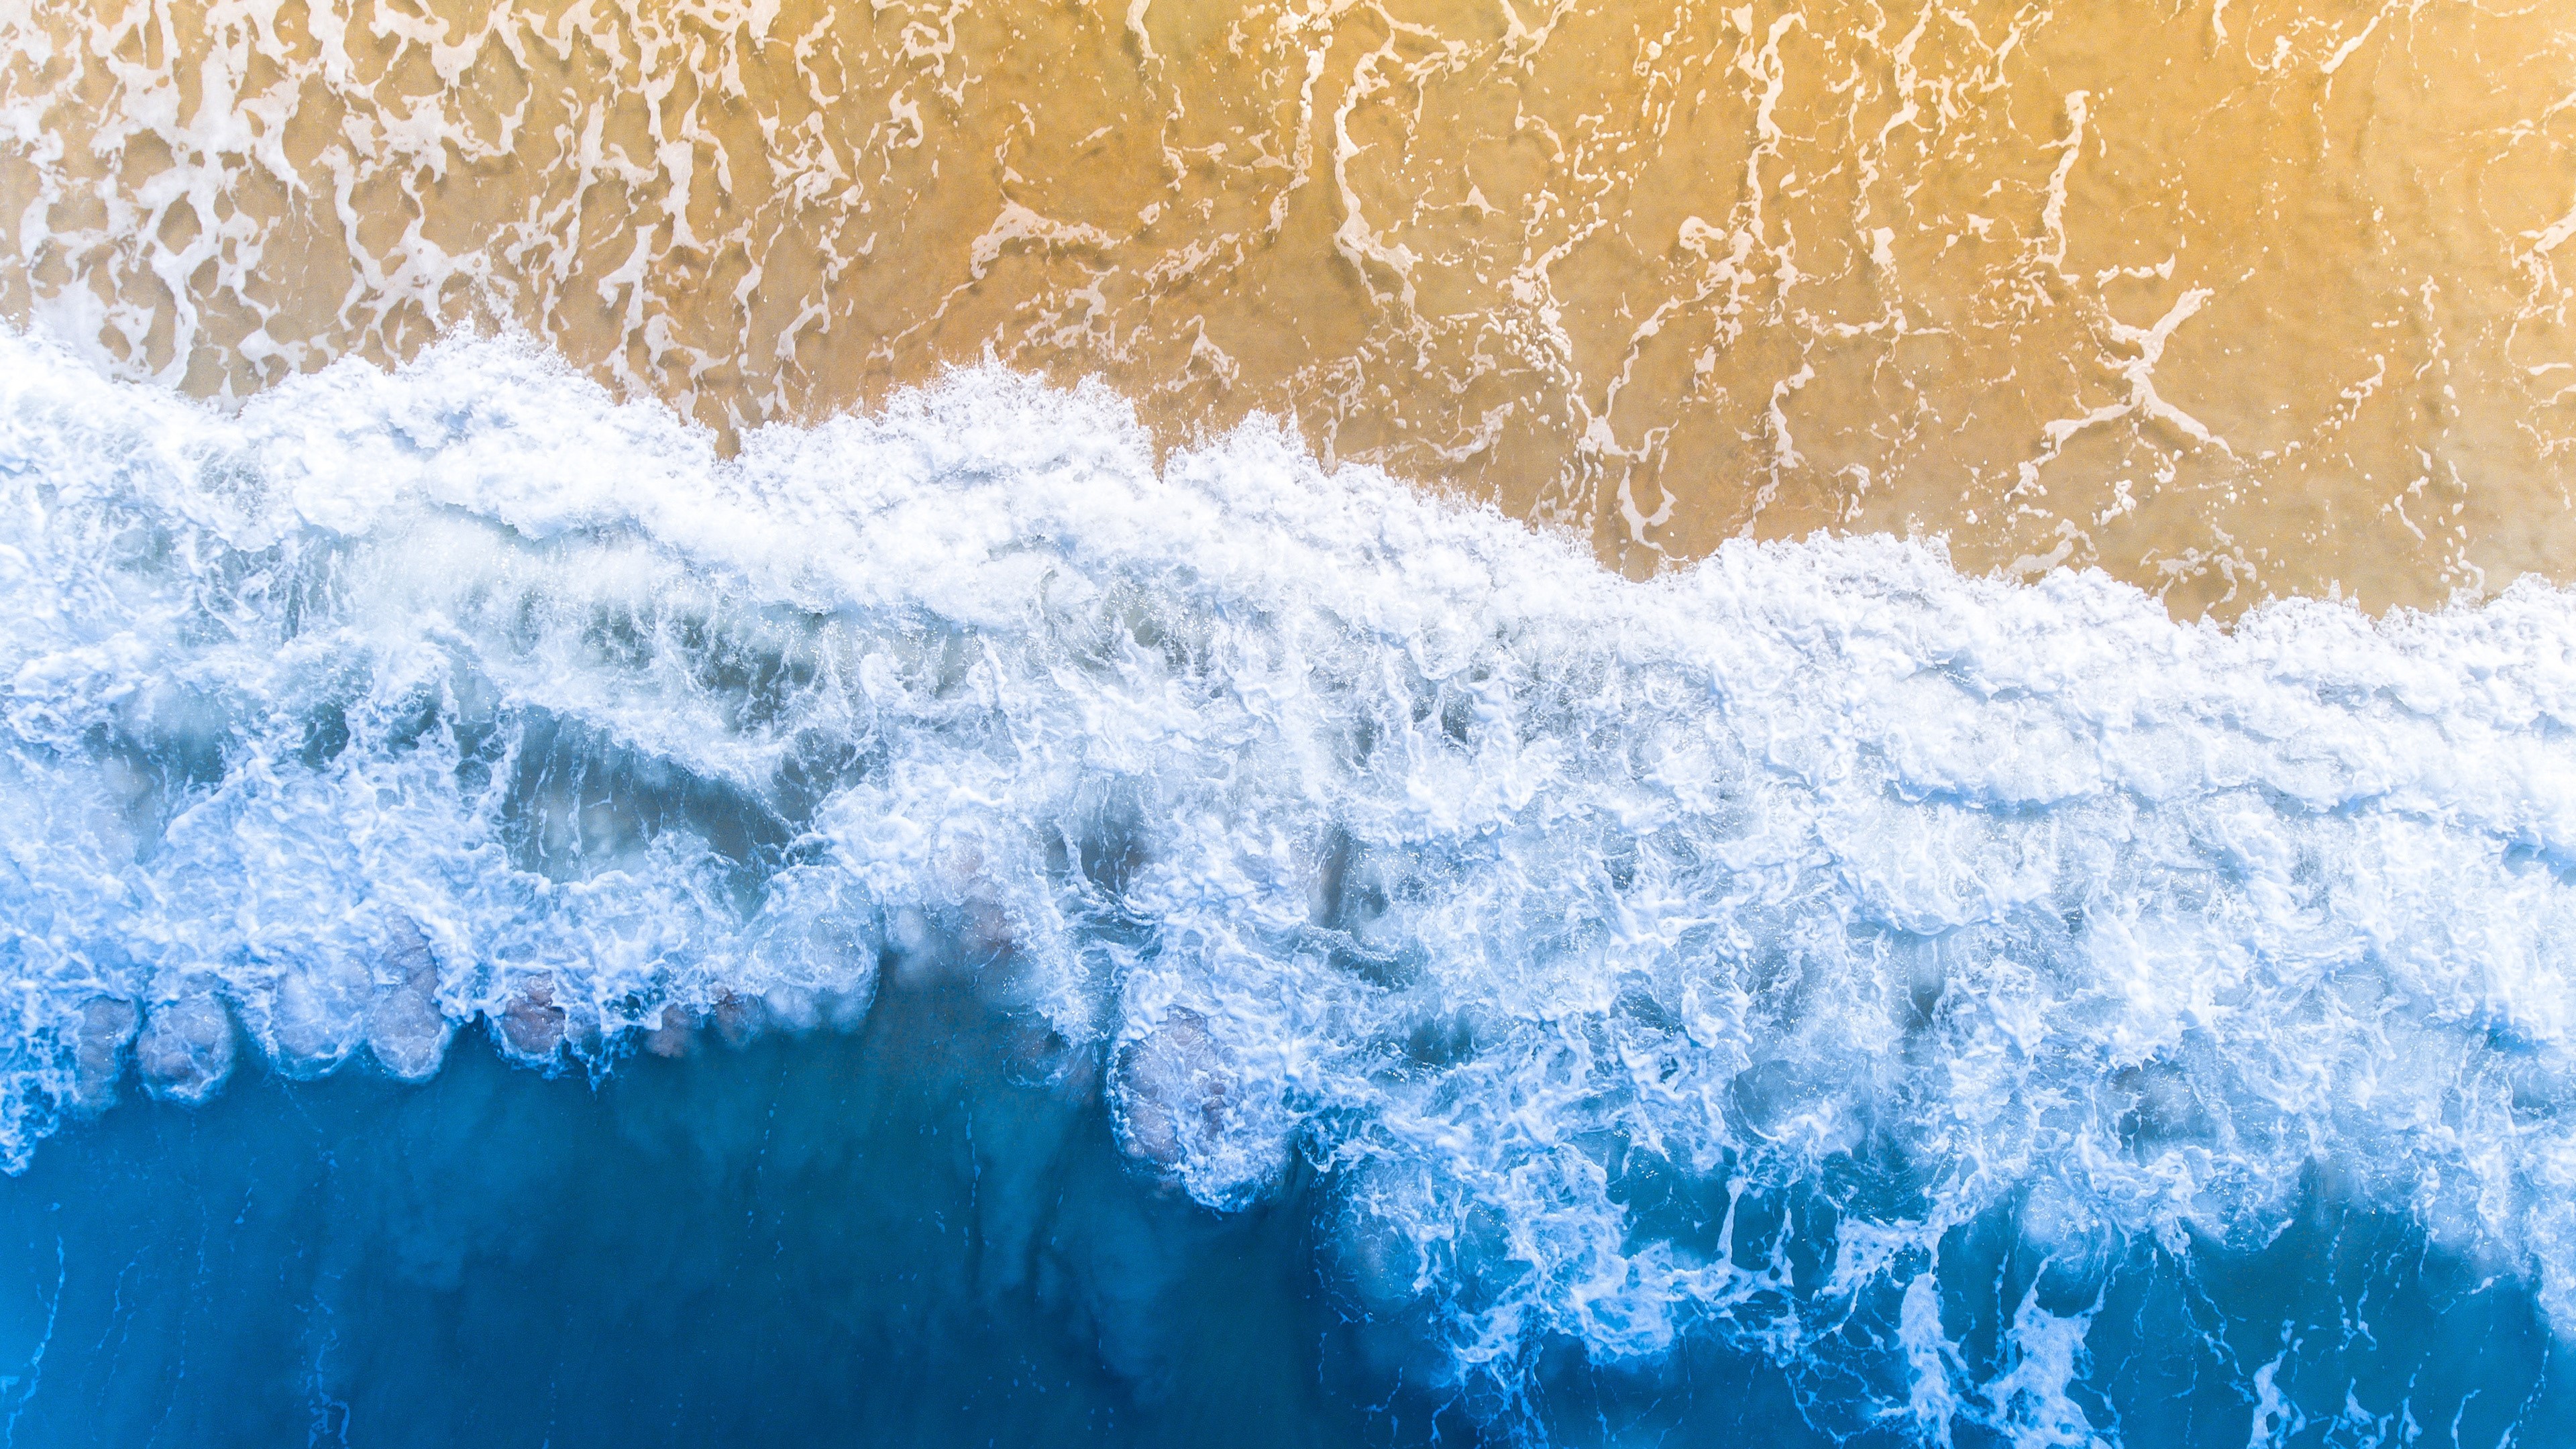 Wallpaper / waves, sea, sand, beach, water, wet, top view, nature, landscape free download